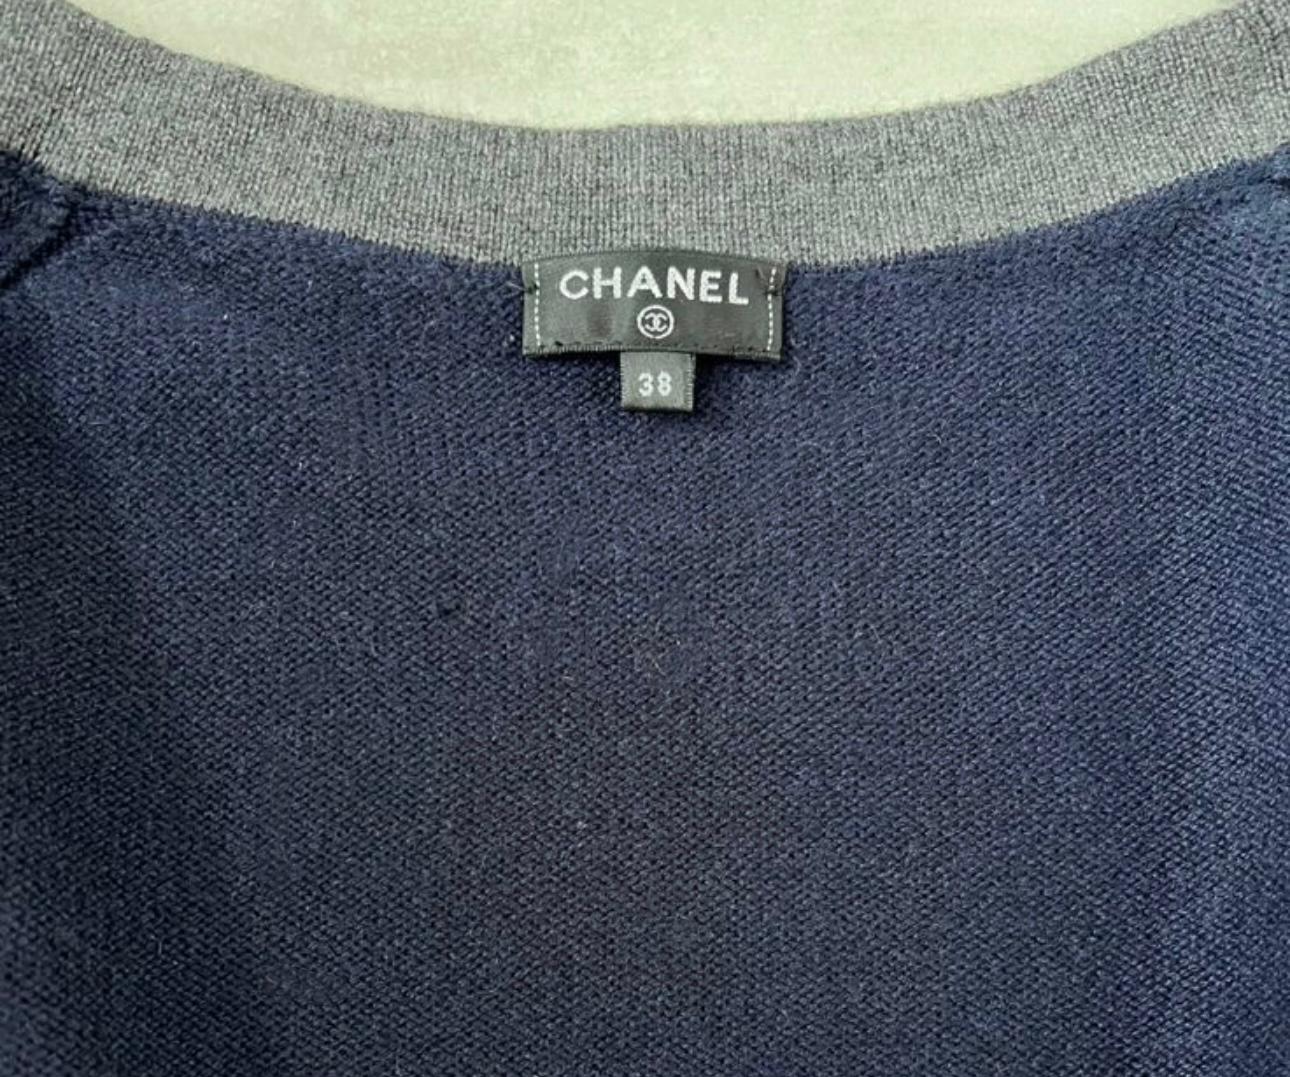 Chanel Sophia Coppola Style New Cashmere Suit For Sale 5